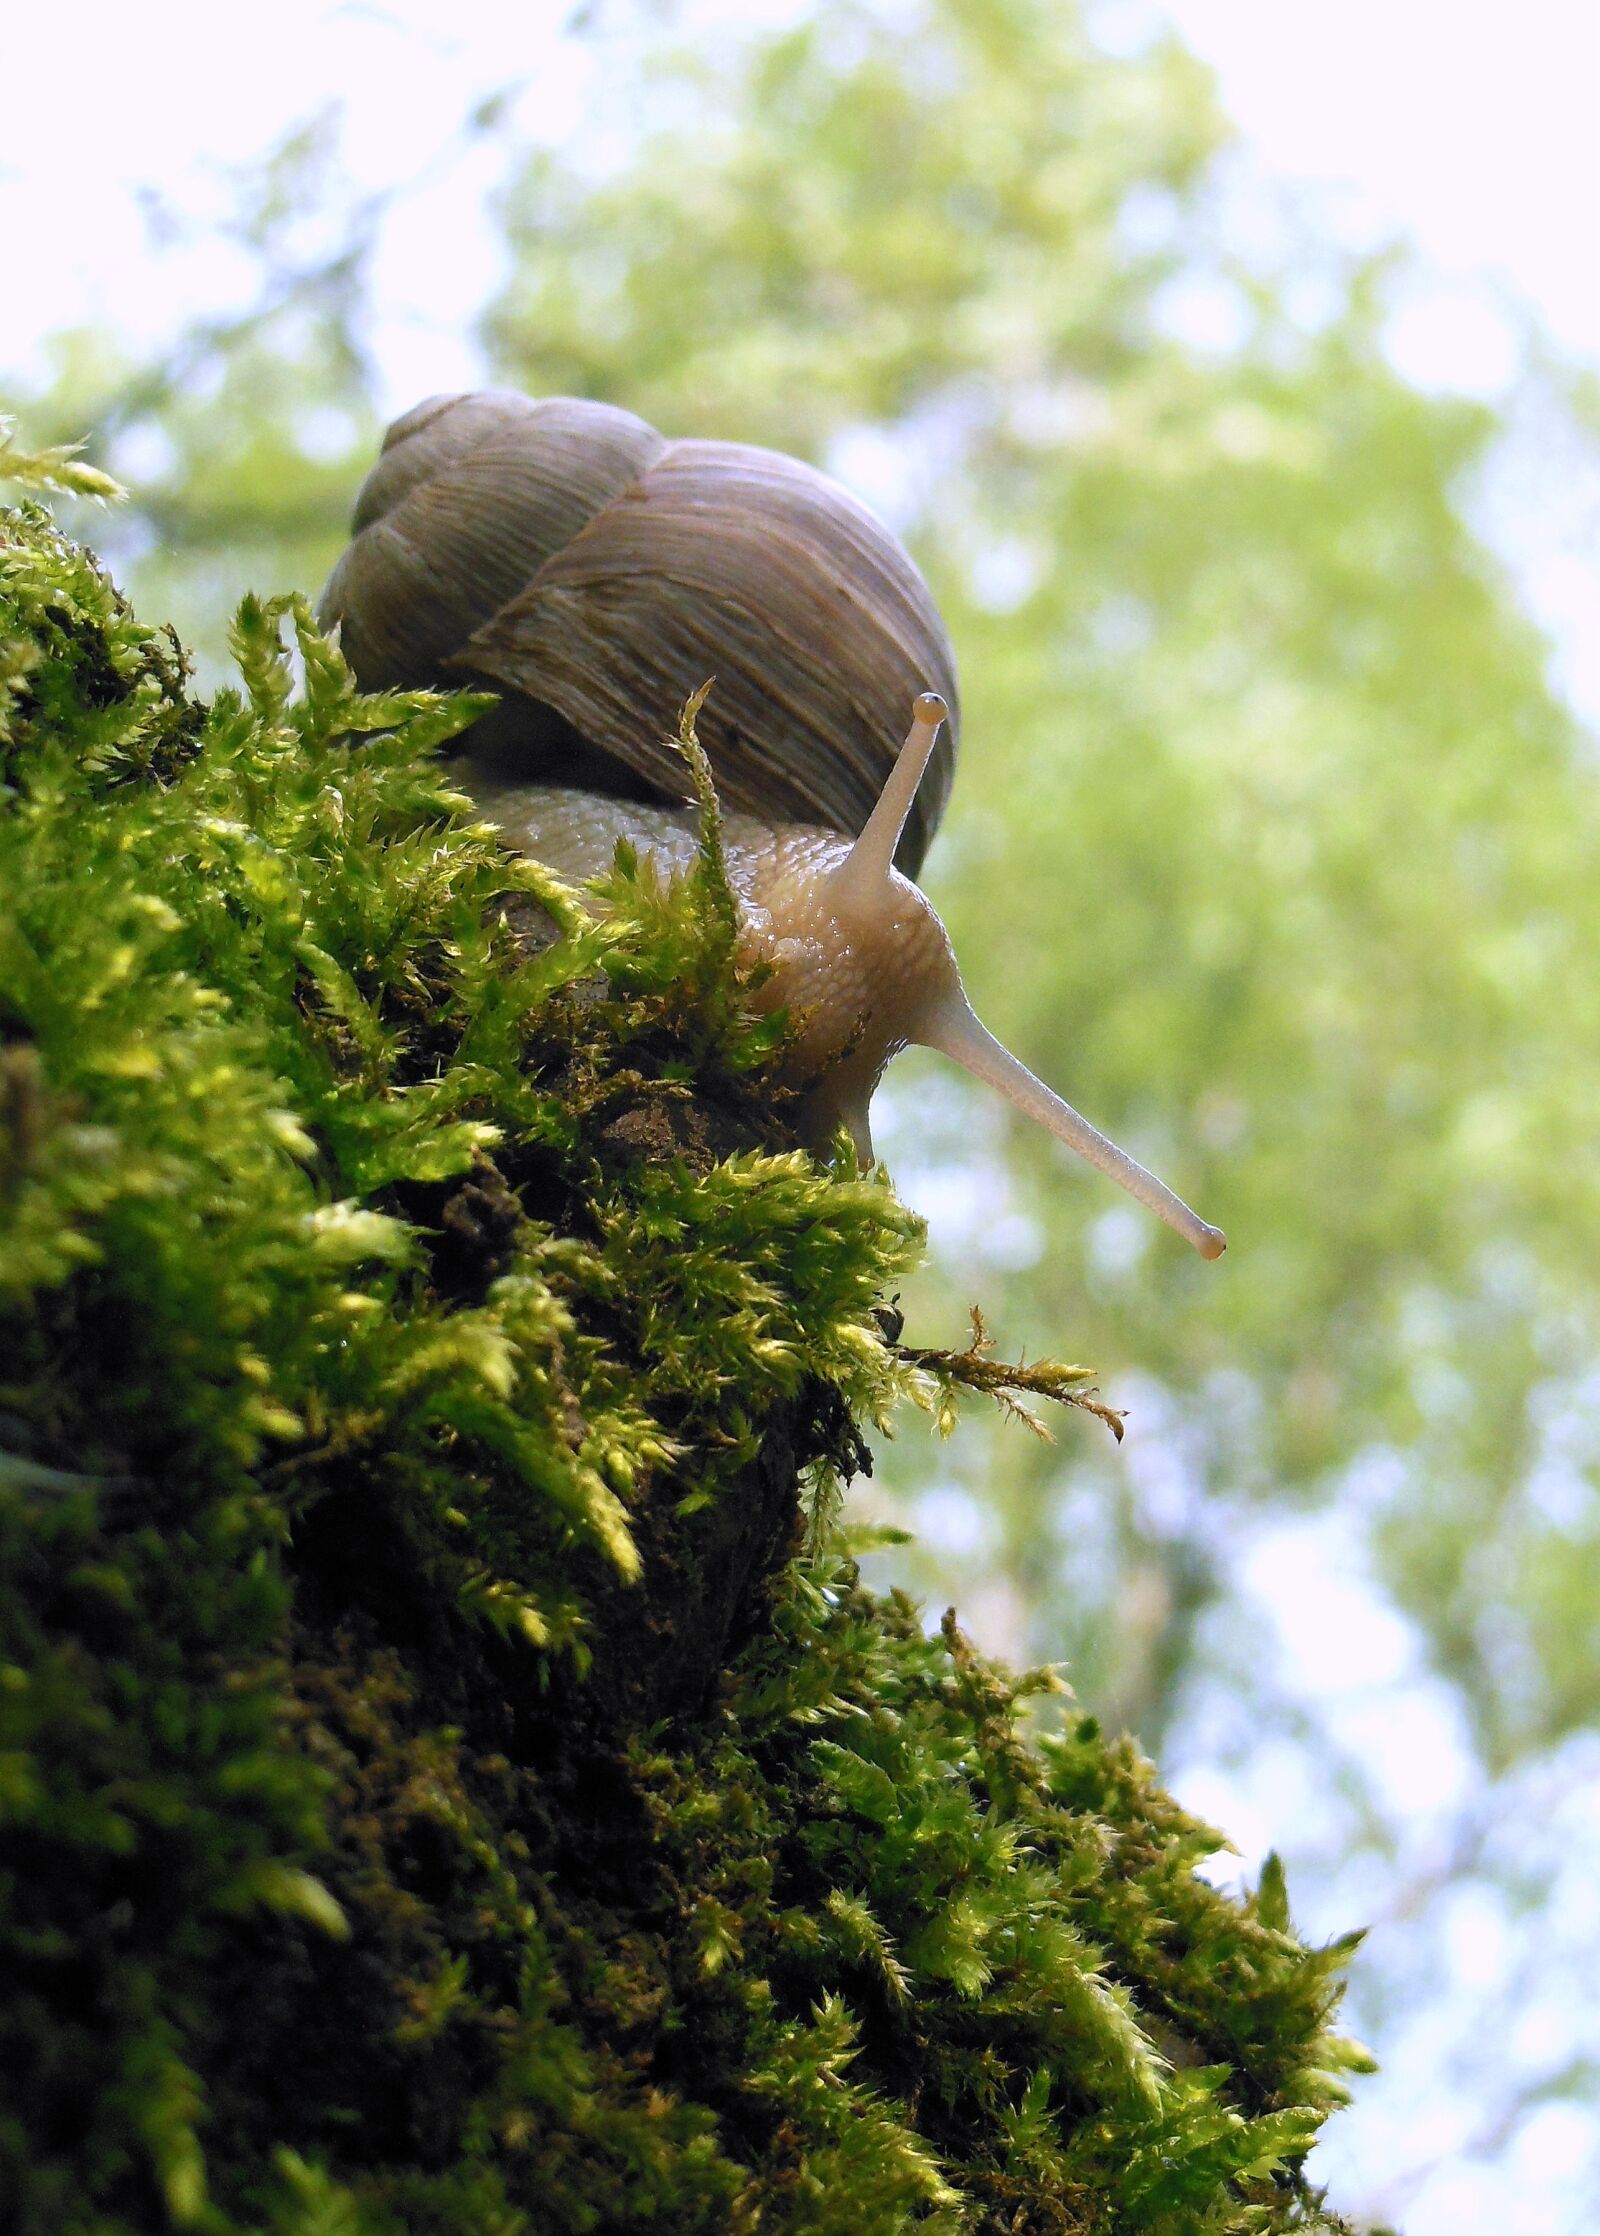 Nikon Coolpix S9300 sample photo. Snail, forest, mollusk photography